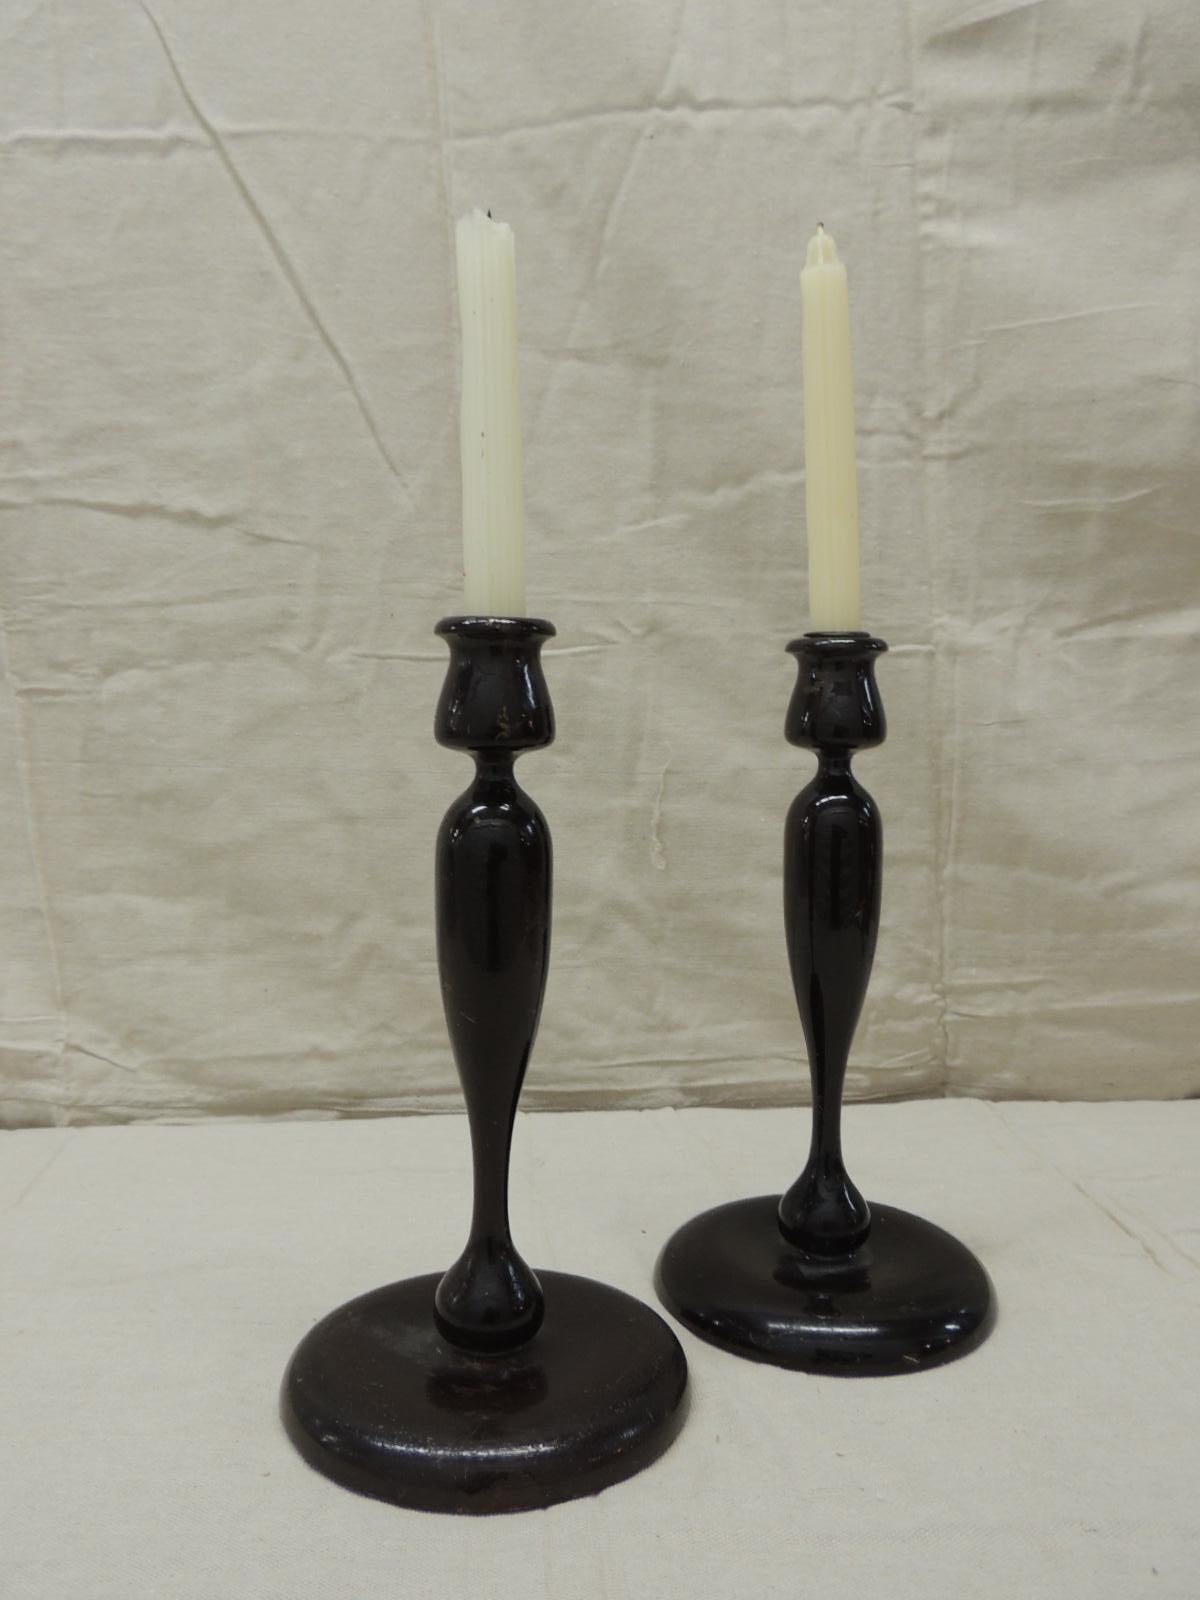 Pair of vintage turned wood candleholders in dark mahogany lacquered finish
Top of the candle designed to look like a tulipiere. (Candles not included)
Bottoms are covered with felt.
Size: 6